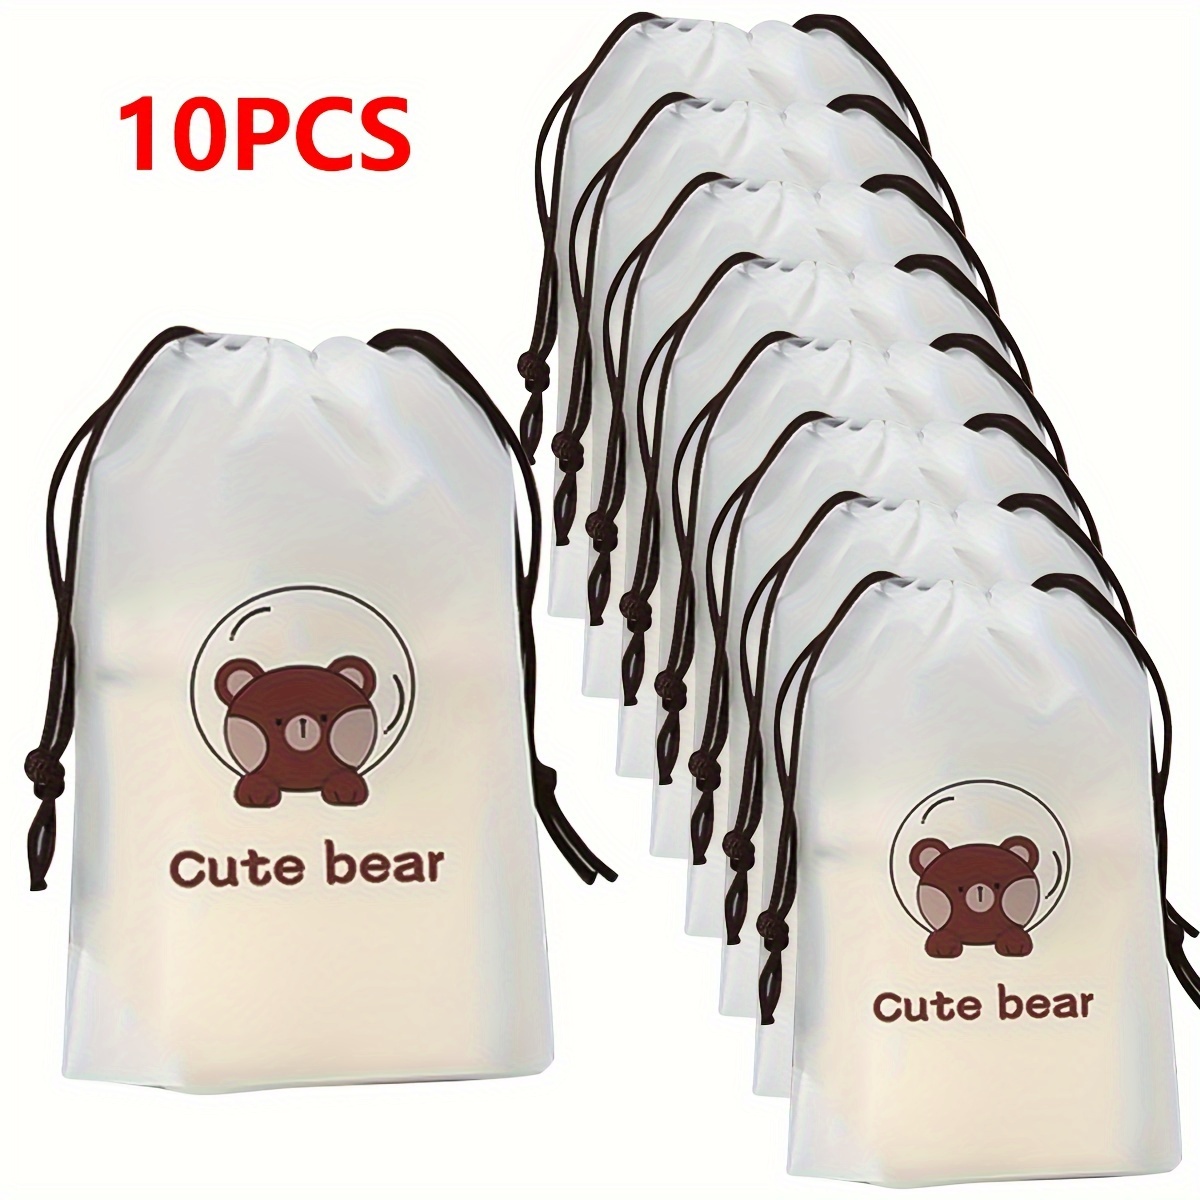 

10pcs Cute Bear Travel Storage Bags, Plastic Frosted Drawstring Pouches, Dustproof Packing Bags